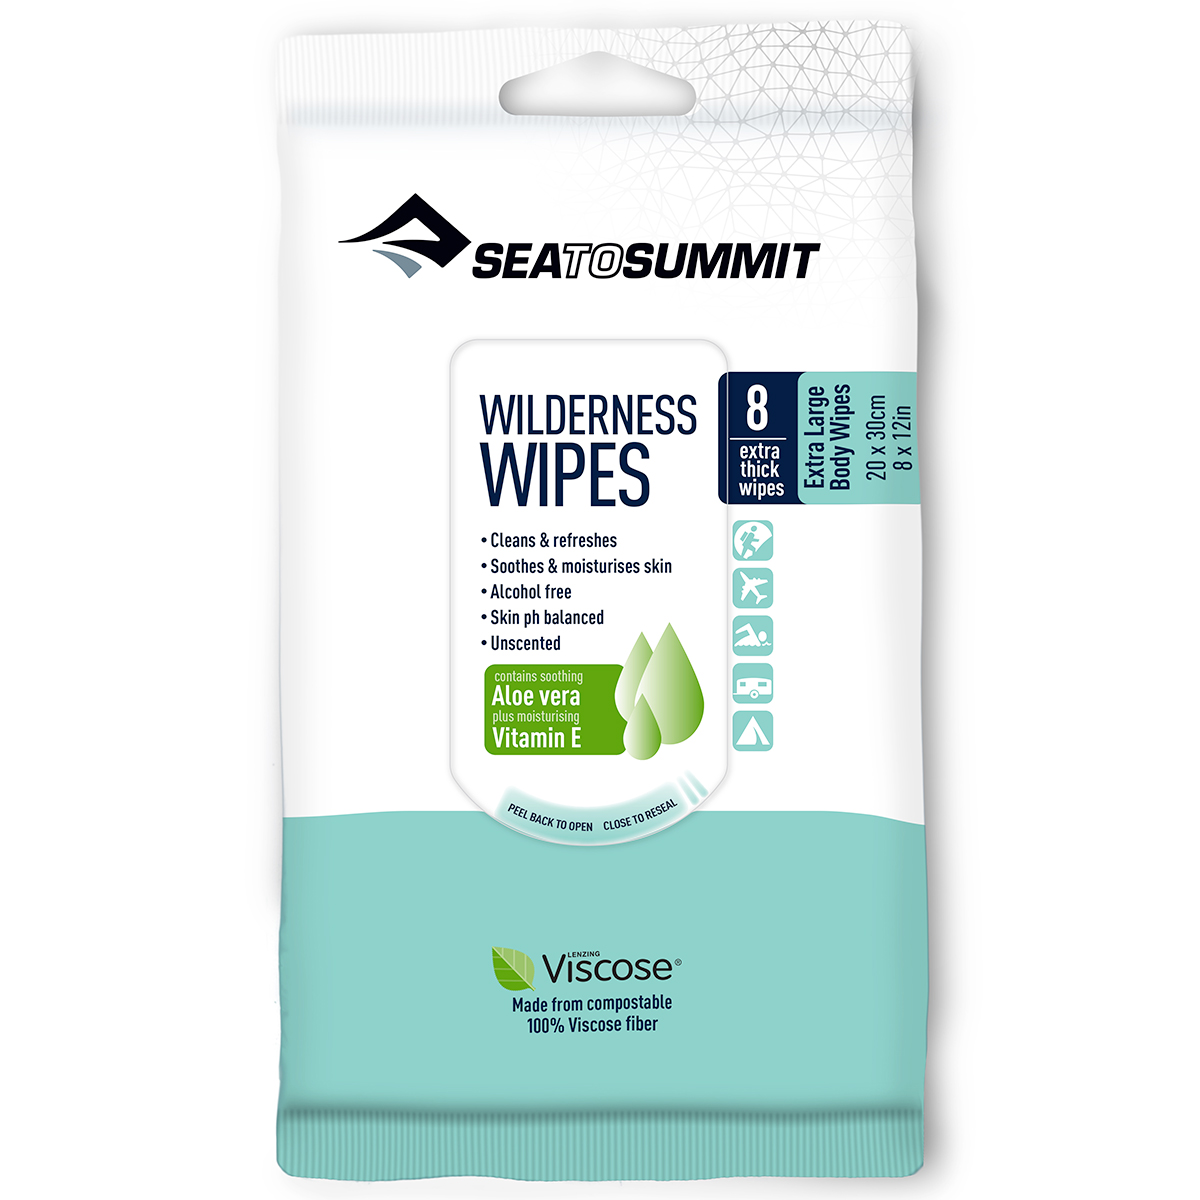 Sea To Summit Wilderness Wipes Xl, 8 Pack